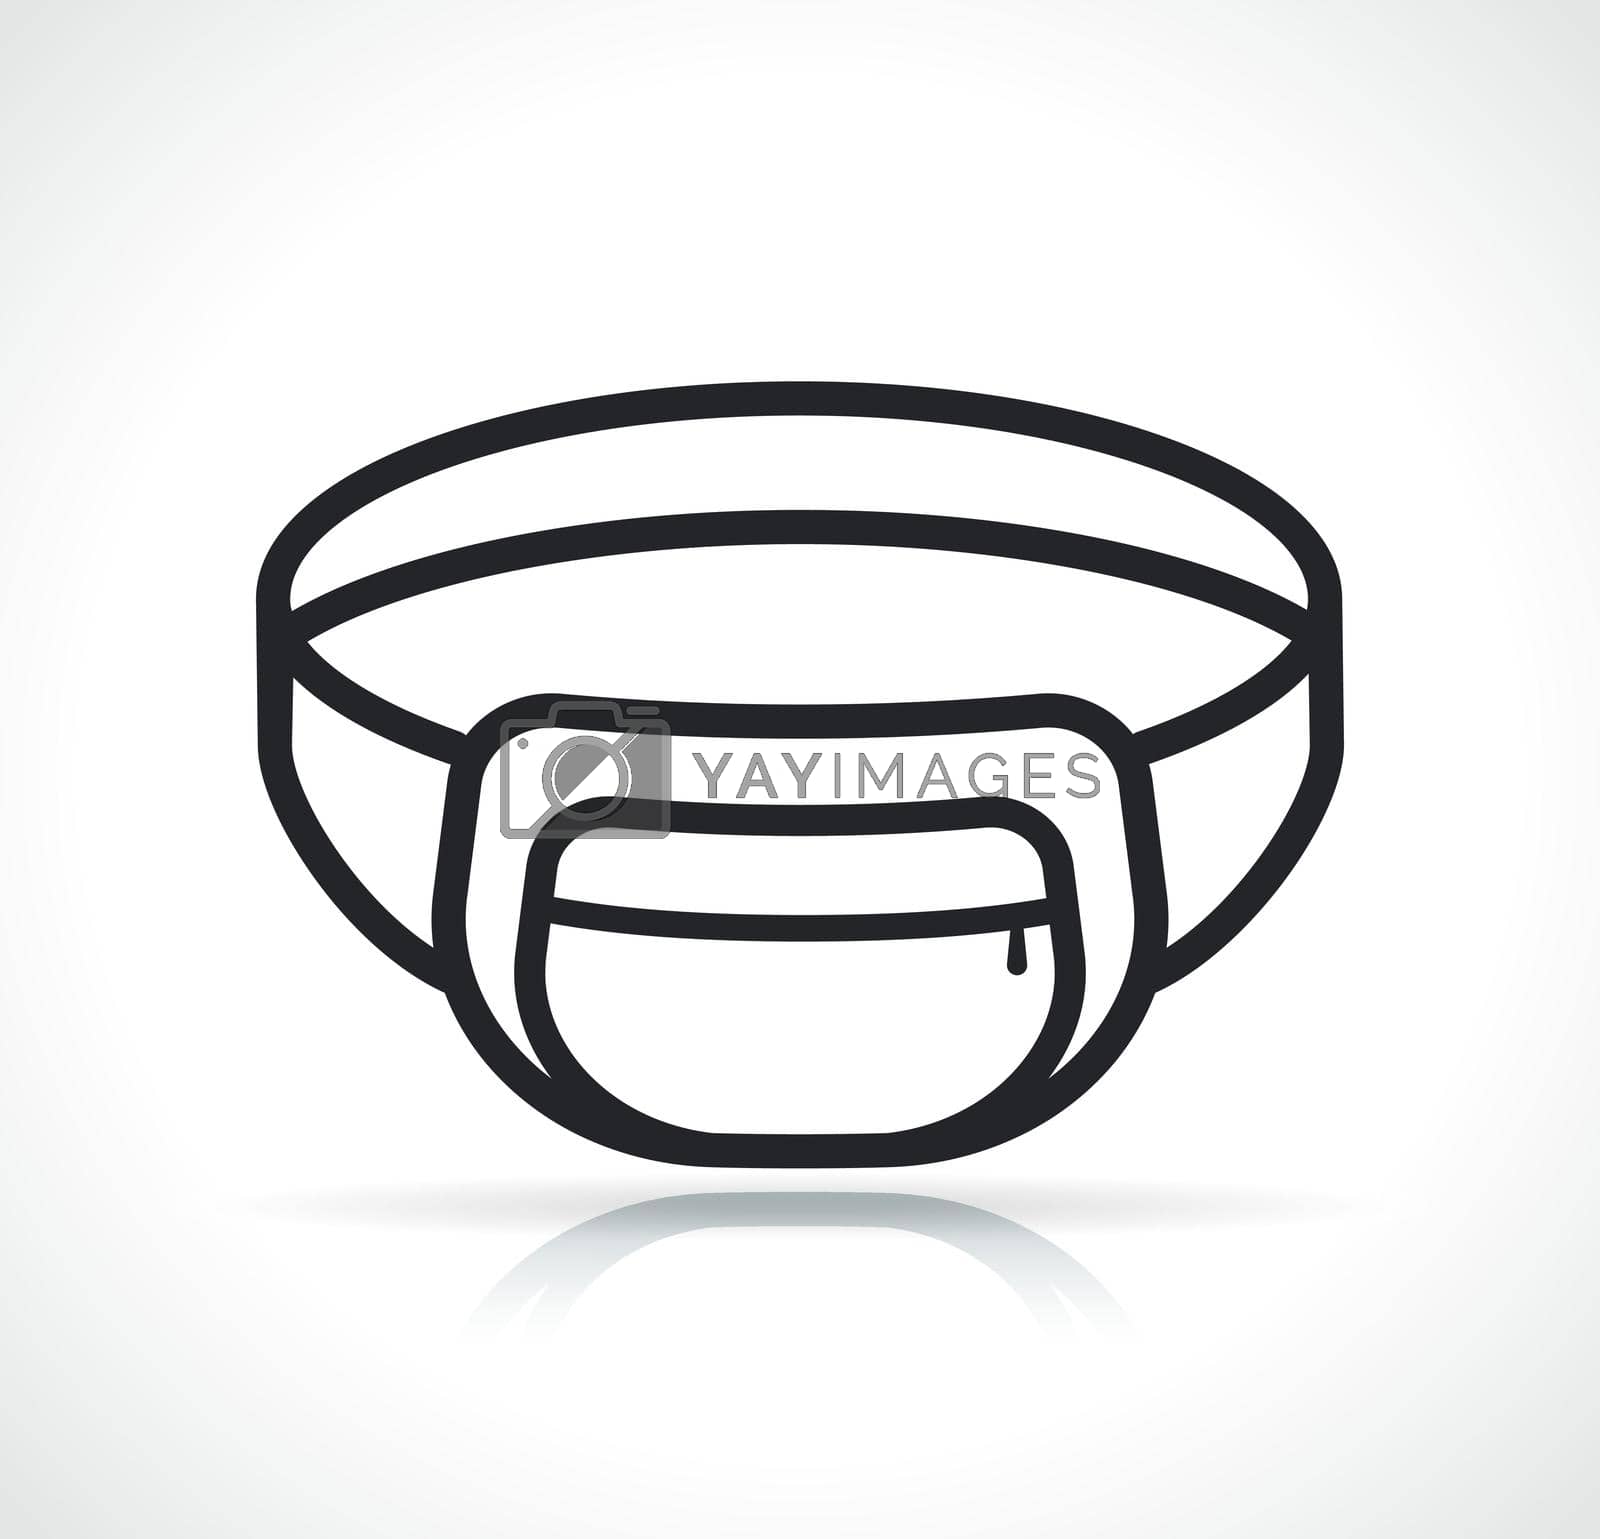 Royalty free image of waist bag thin line icon by Francois_Poirier